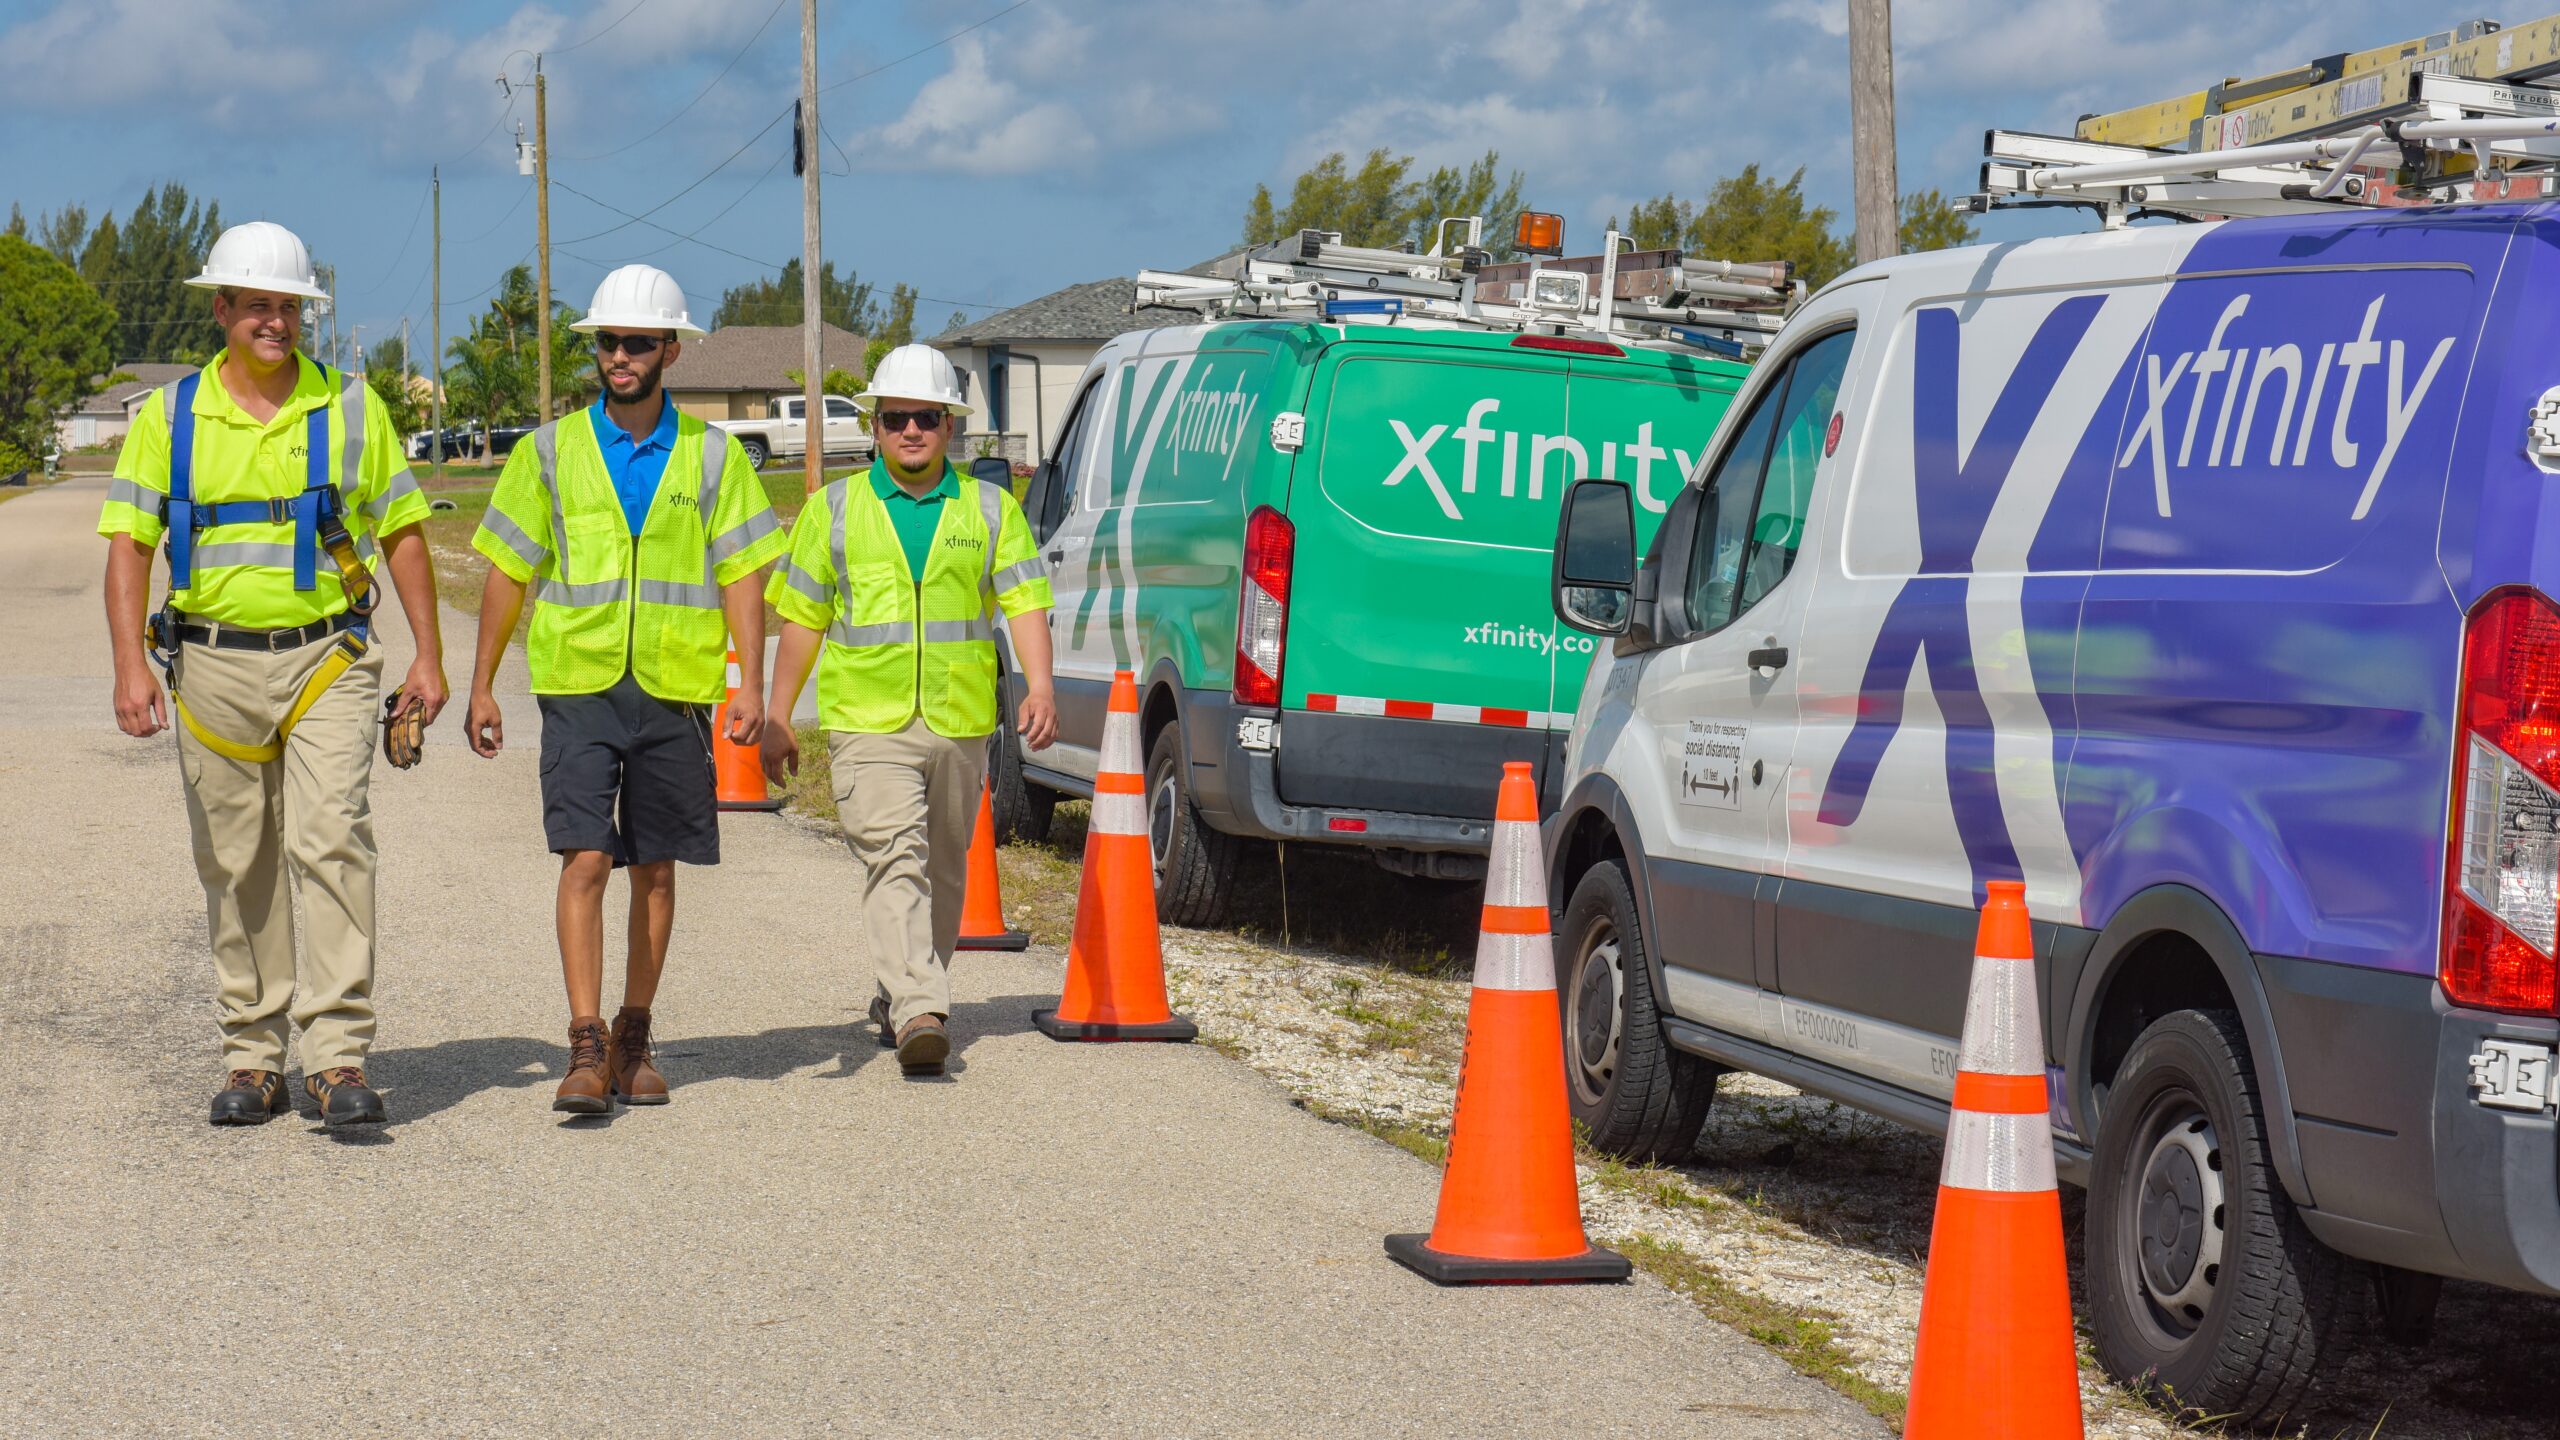 Comcast Bringing Internet Service Powered by the Xfinity 10G Network to Inverness